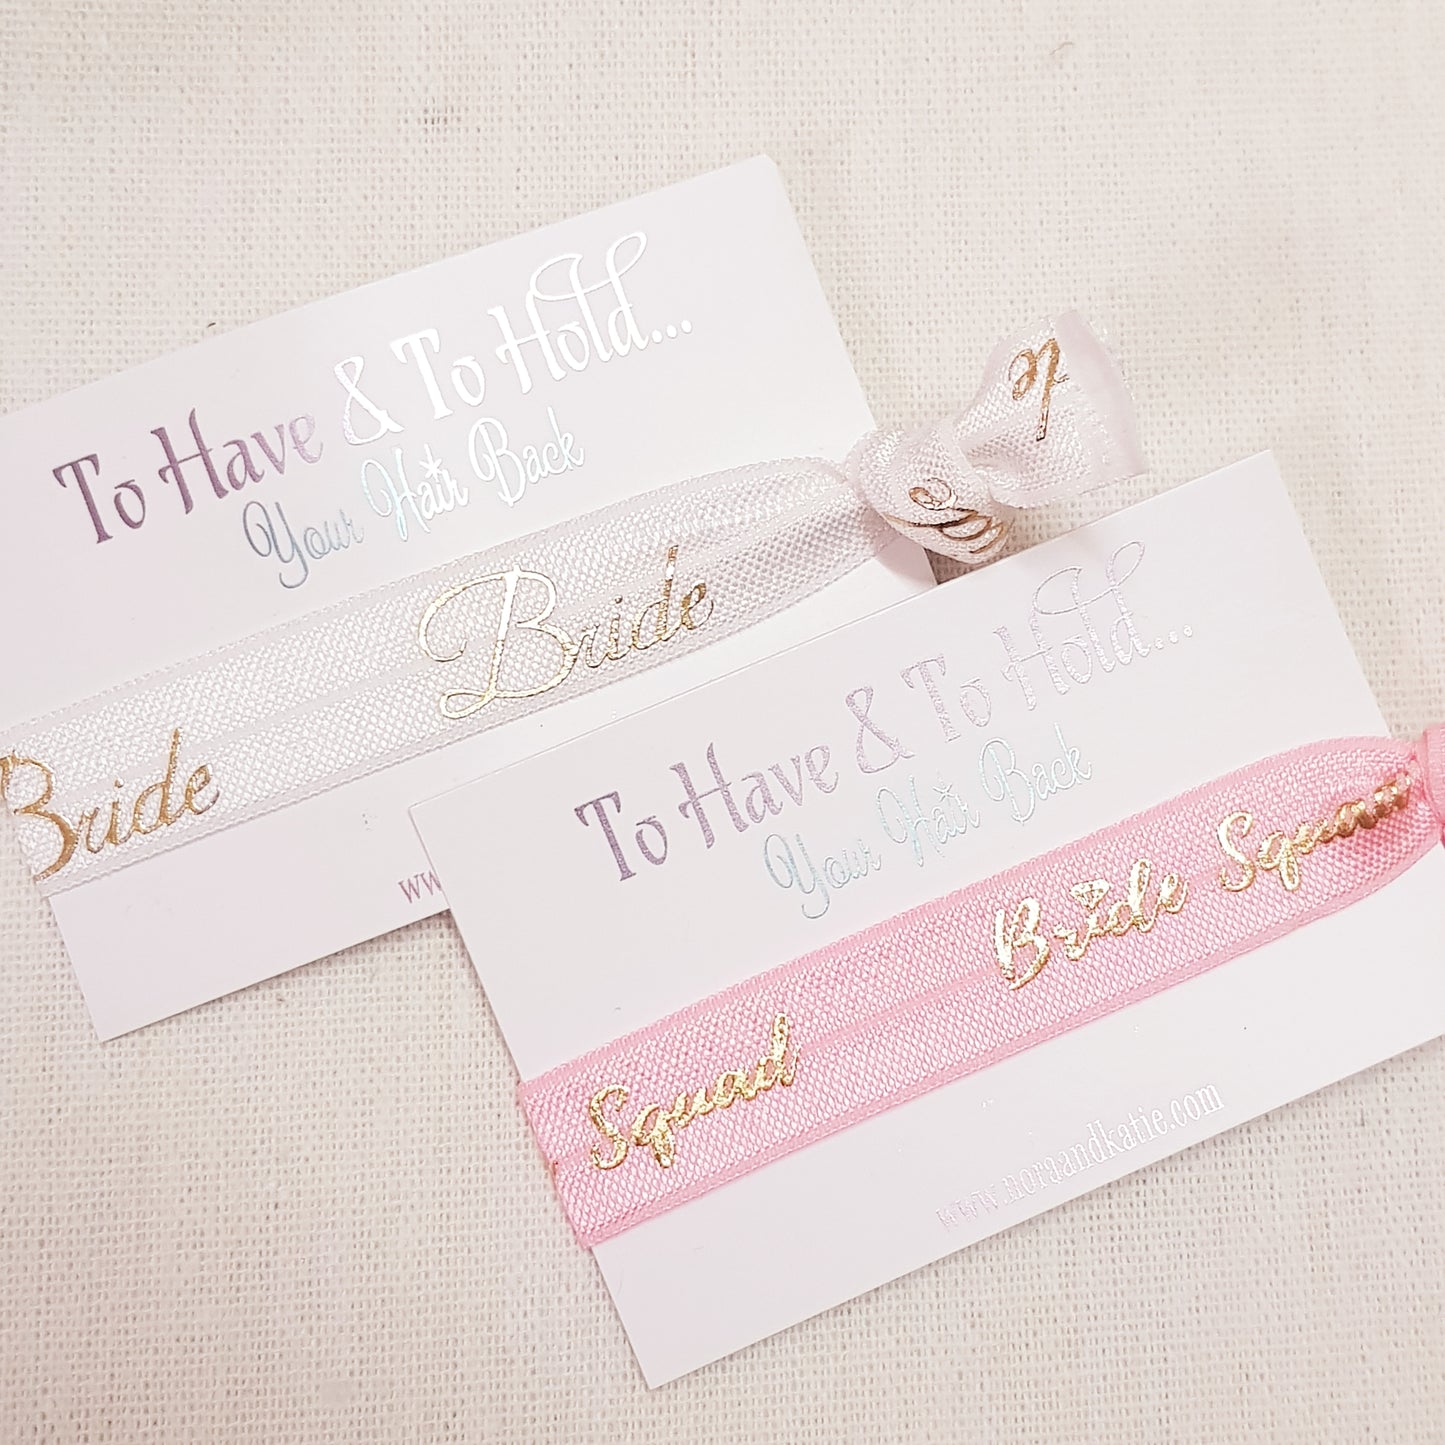 Hen Party bag fillers - To have and to hold hair ties